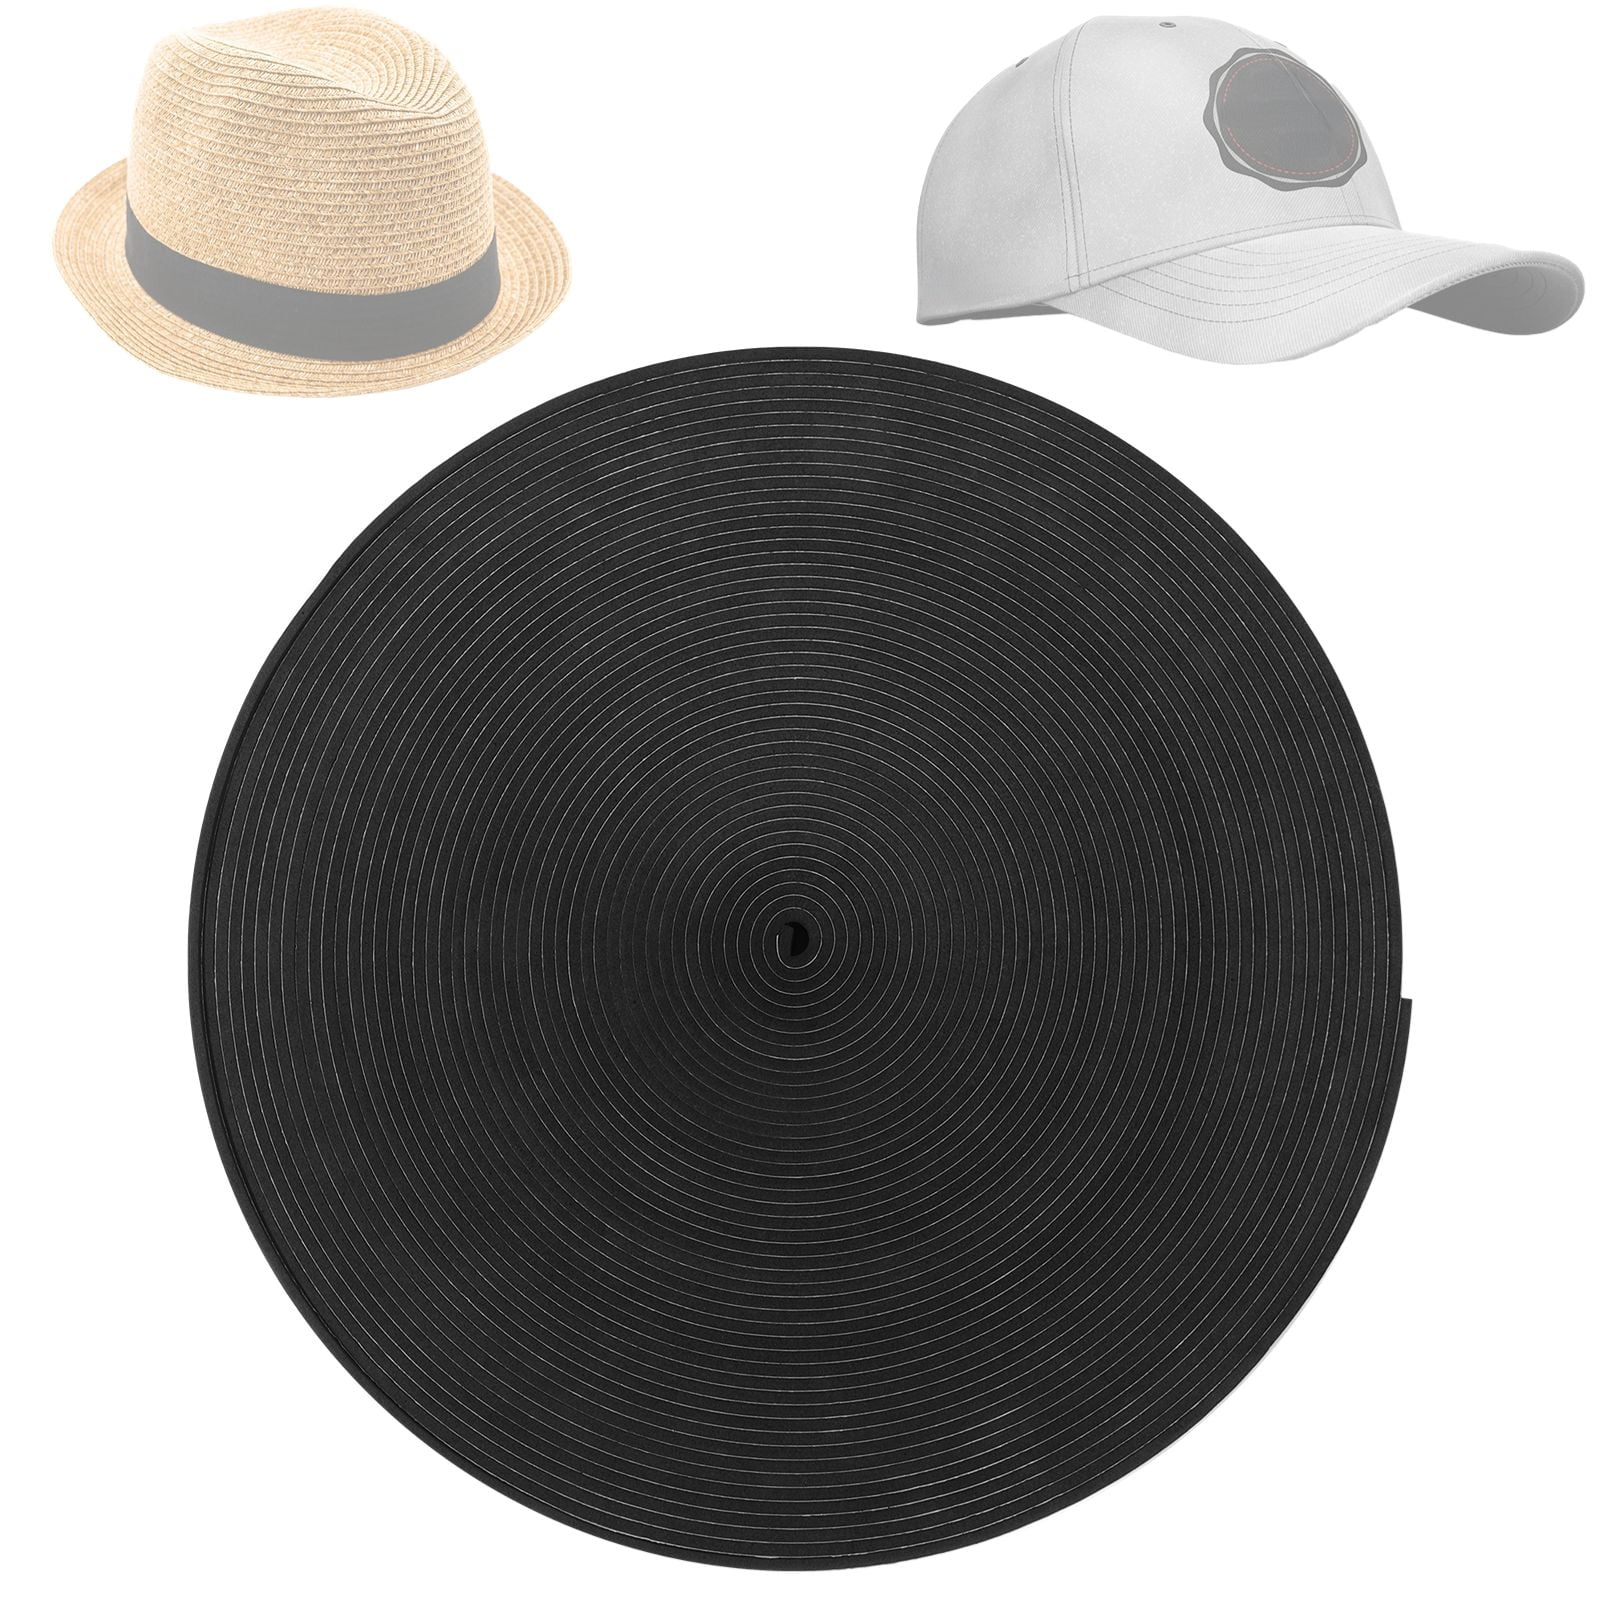 Bamboopack 10 Pieces Hat Size Reducer Hat Band Self-Adhesive Foam Hat Size  Reducing Tape Strip Insert for Women and Men Hat Cap(Black and White)